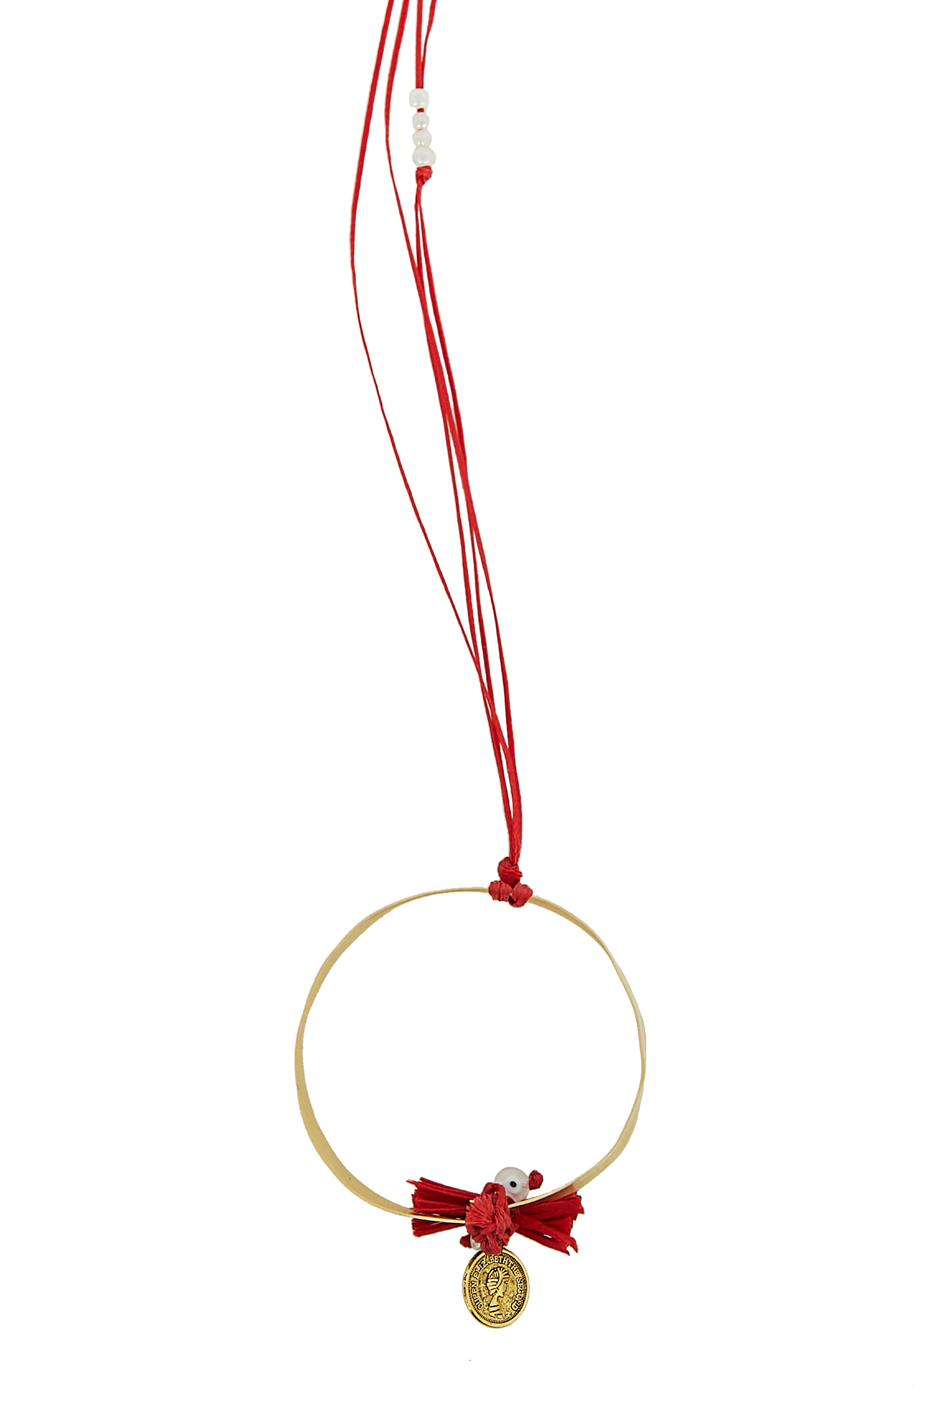 Handmade long necklace Henrietta by brass with a small eye, florin and bow from thread.